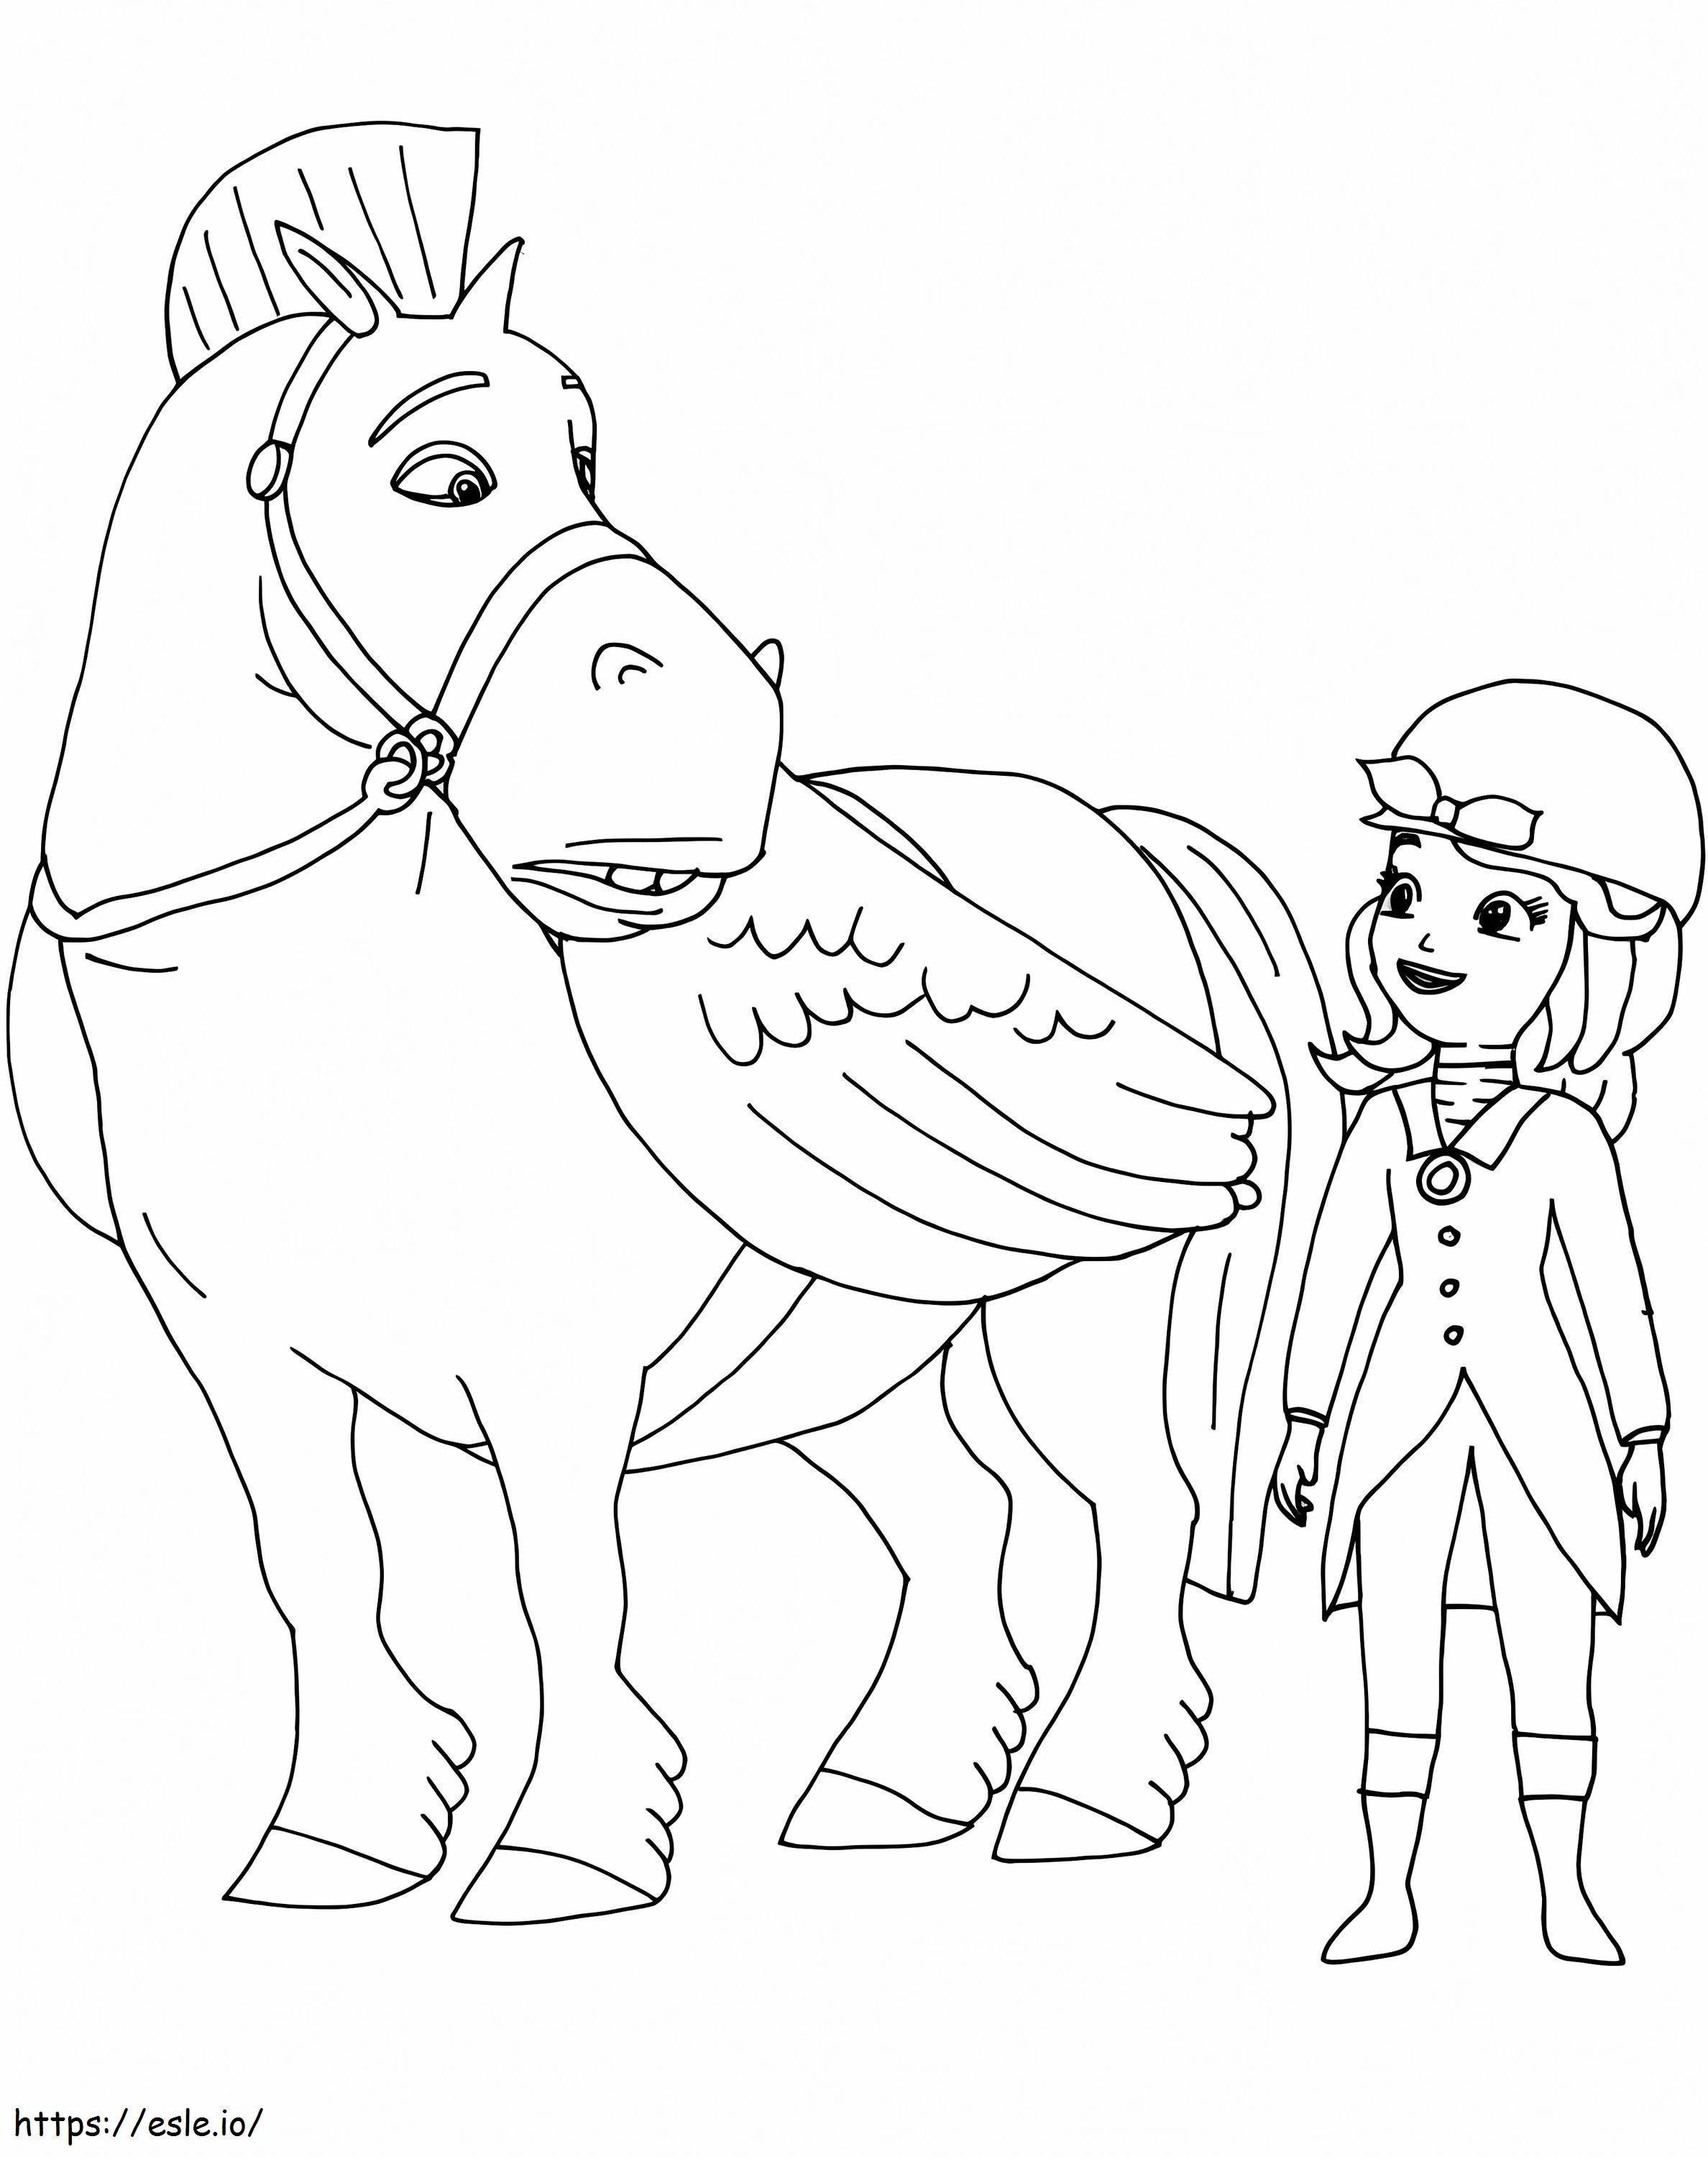 Princess Sofia And The Little One coloring page